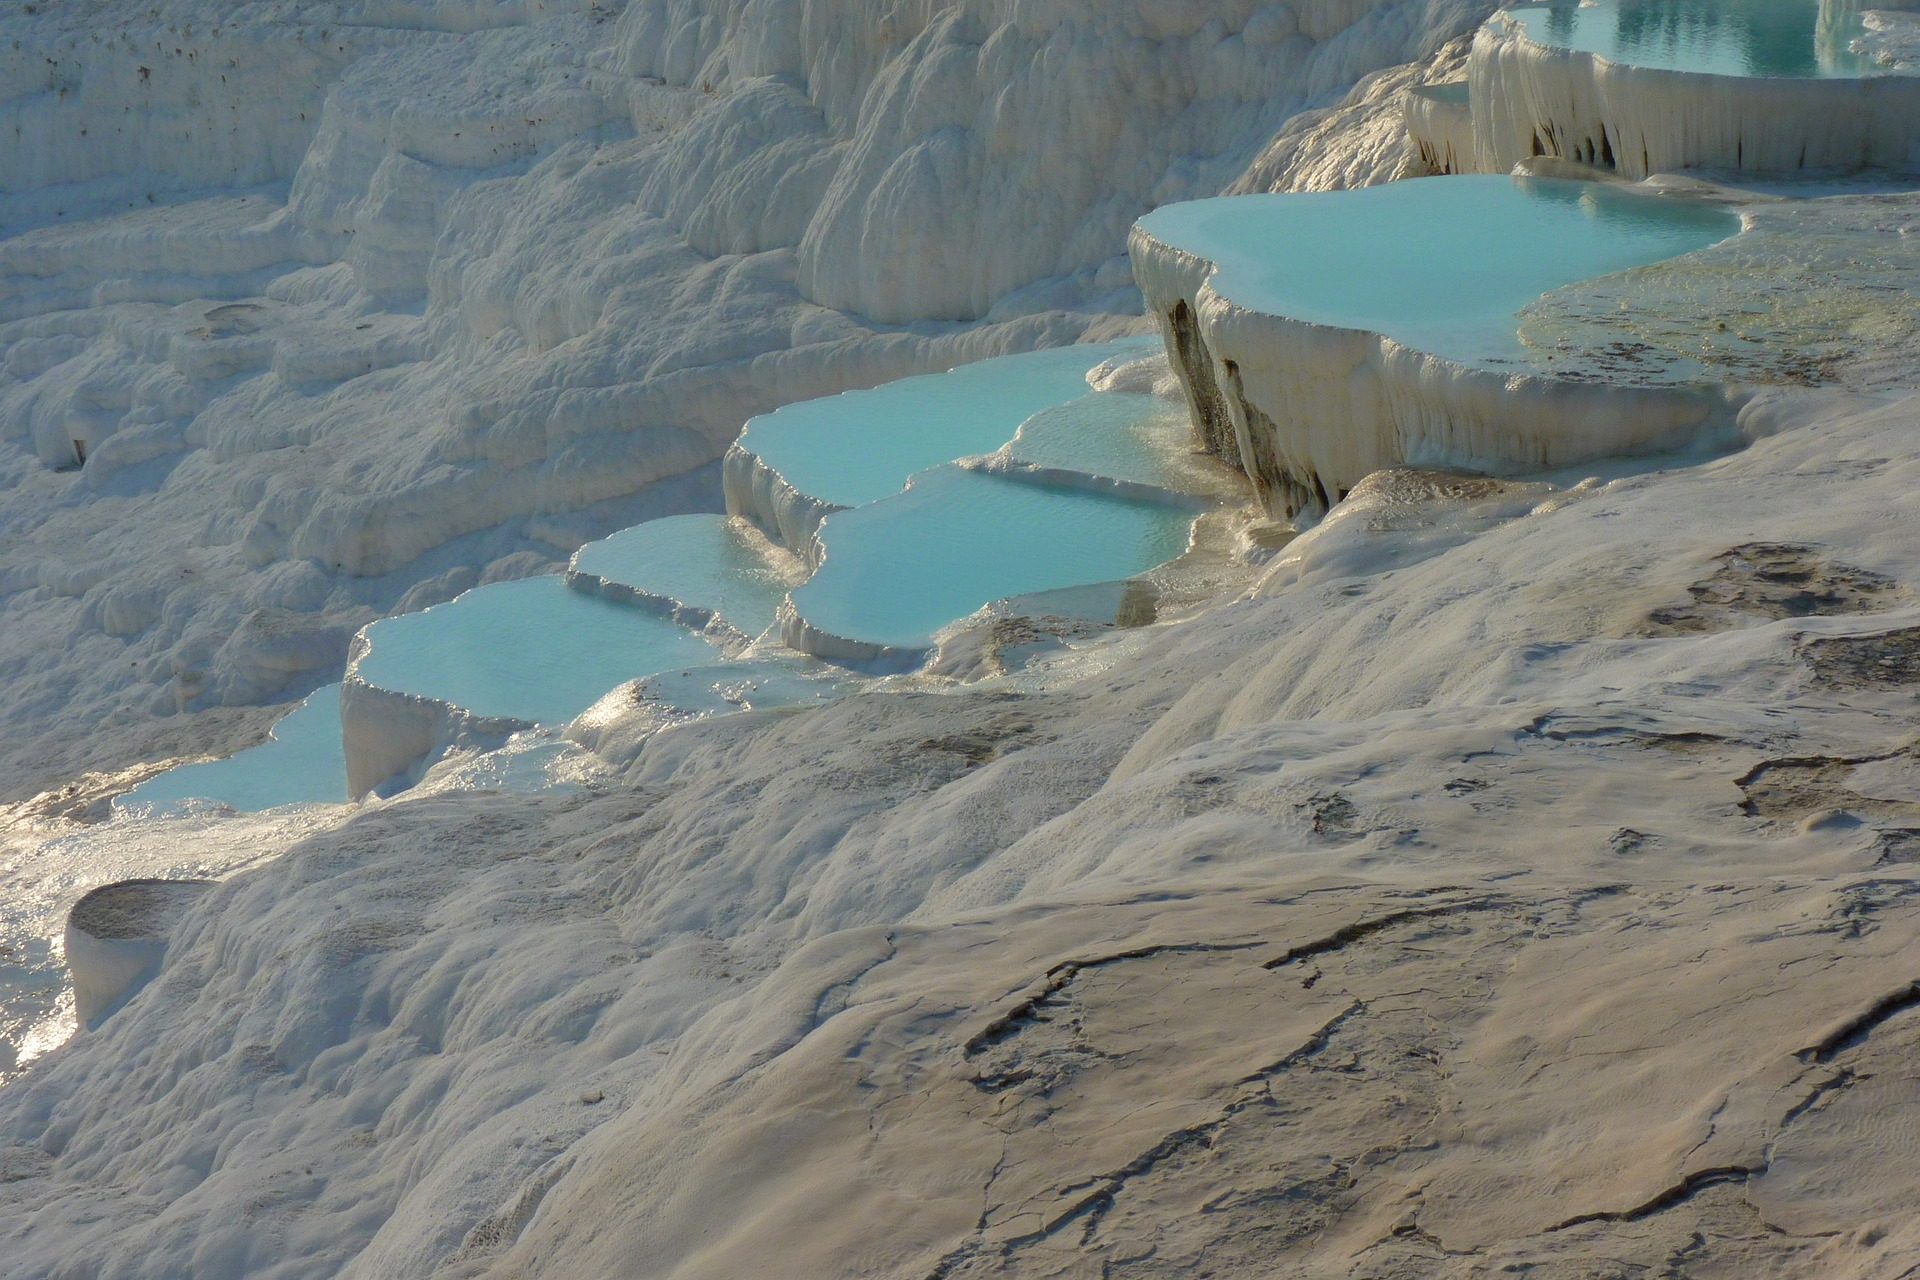 <p>Pamukkale means 'cotton castle'. The town in western Turkey is known for its thermal pools and travertine terraces formed by mineral-rich hot springs. In fact, Pamukkale is a UNESCO World Heritage Site that offers stunning views.</p> <p>Photo: LoggaWiggler / Pixabay</p>